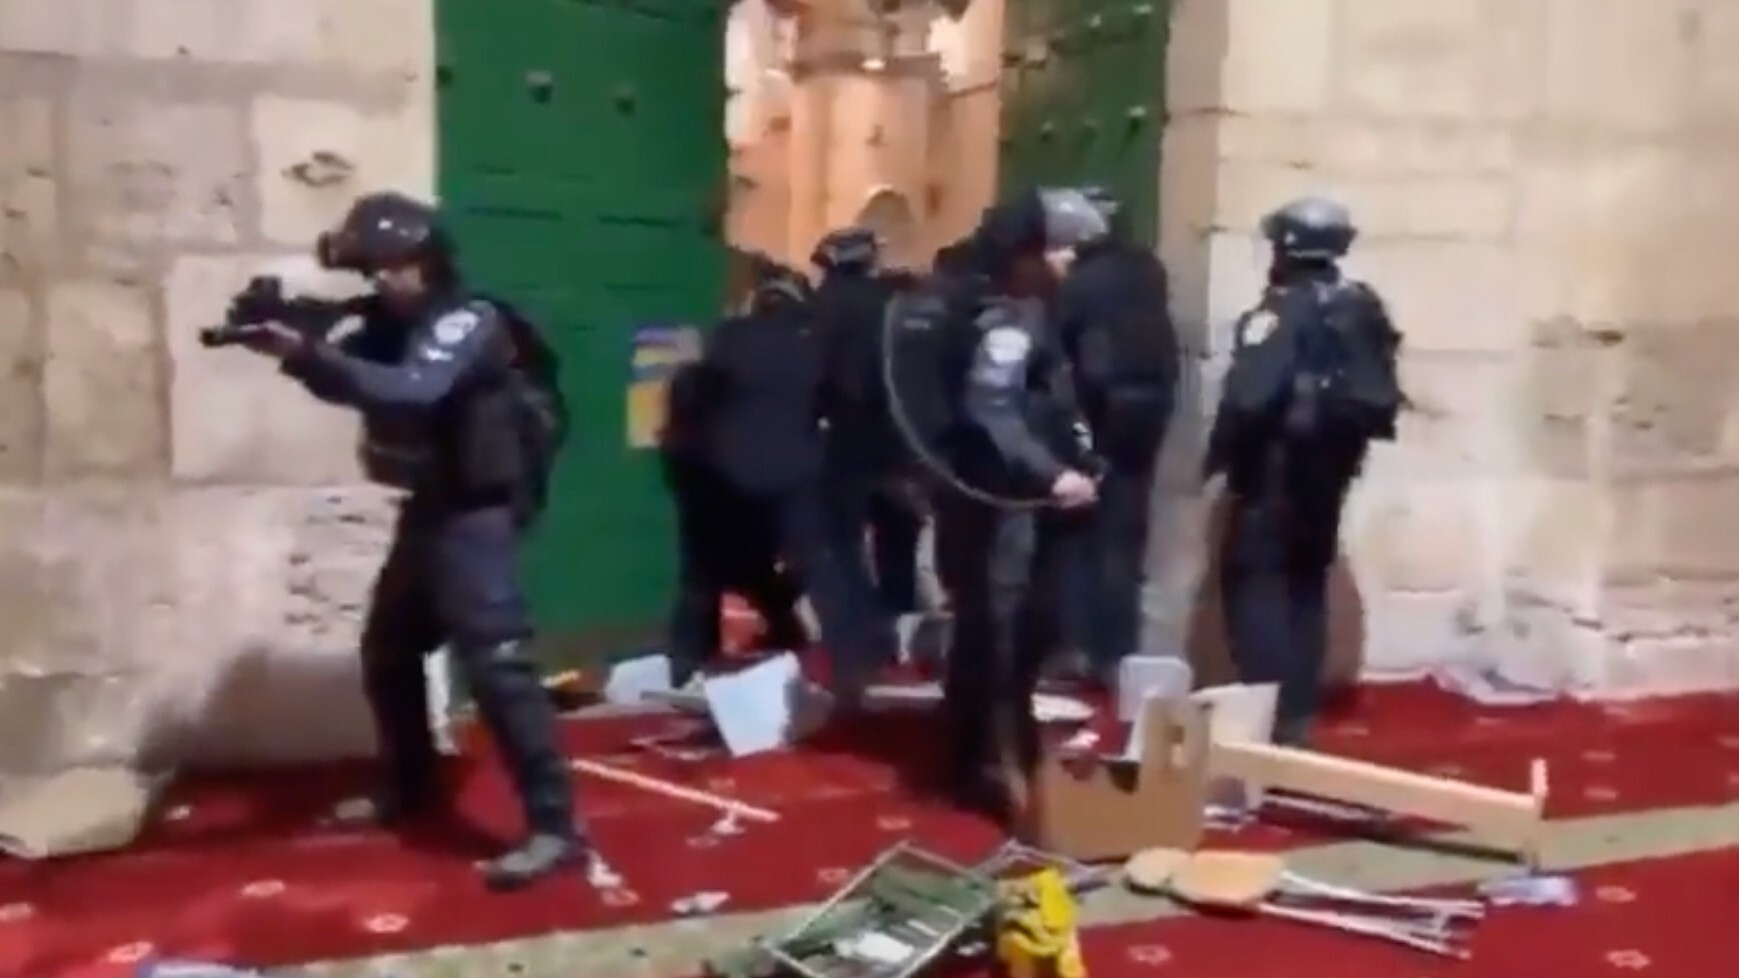 Israel forces during a raid on Al-Aqsa Mosque in occupied East Jerusalem on 5 April 2023 (Twitter/Screenshot)